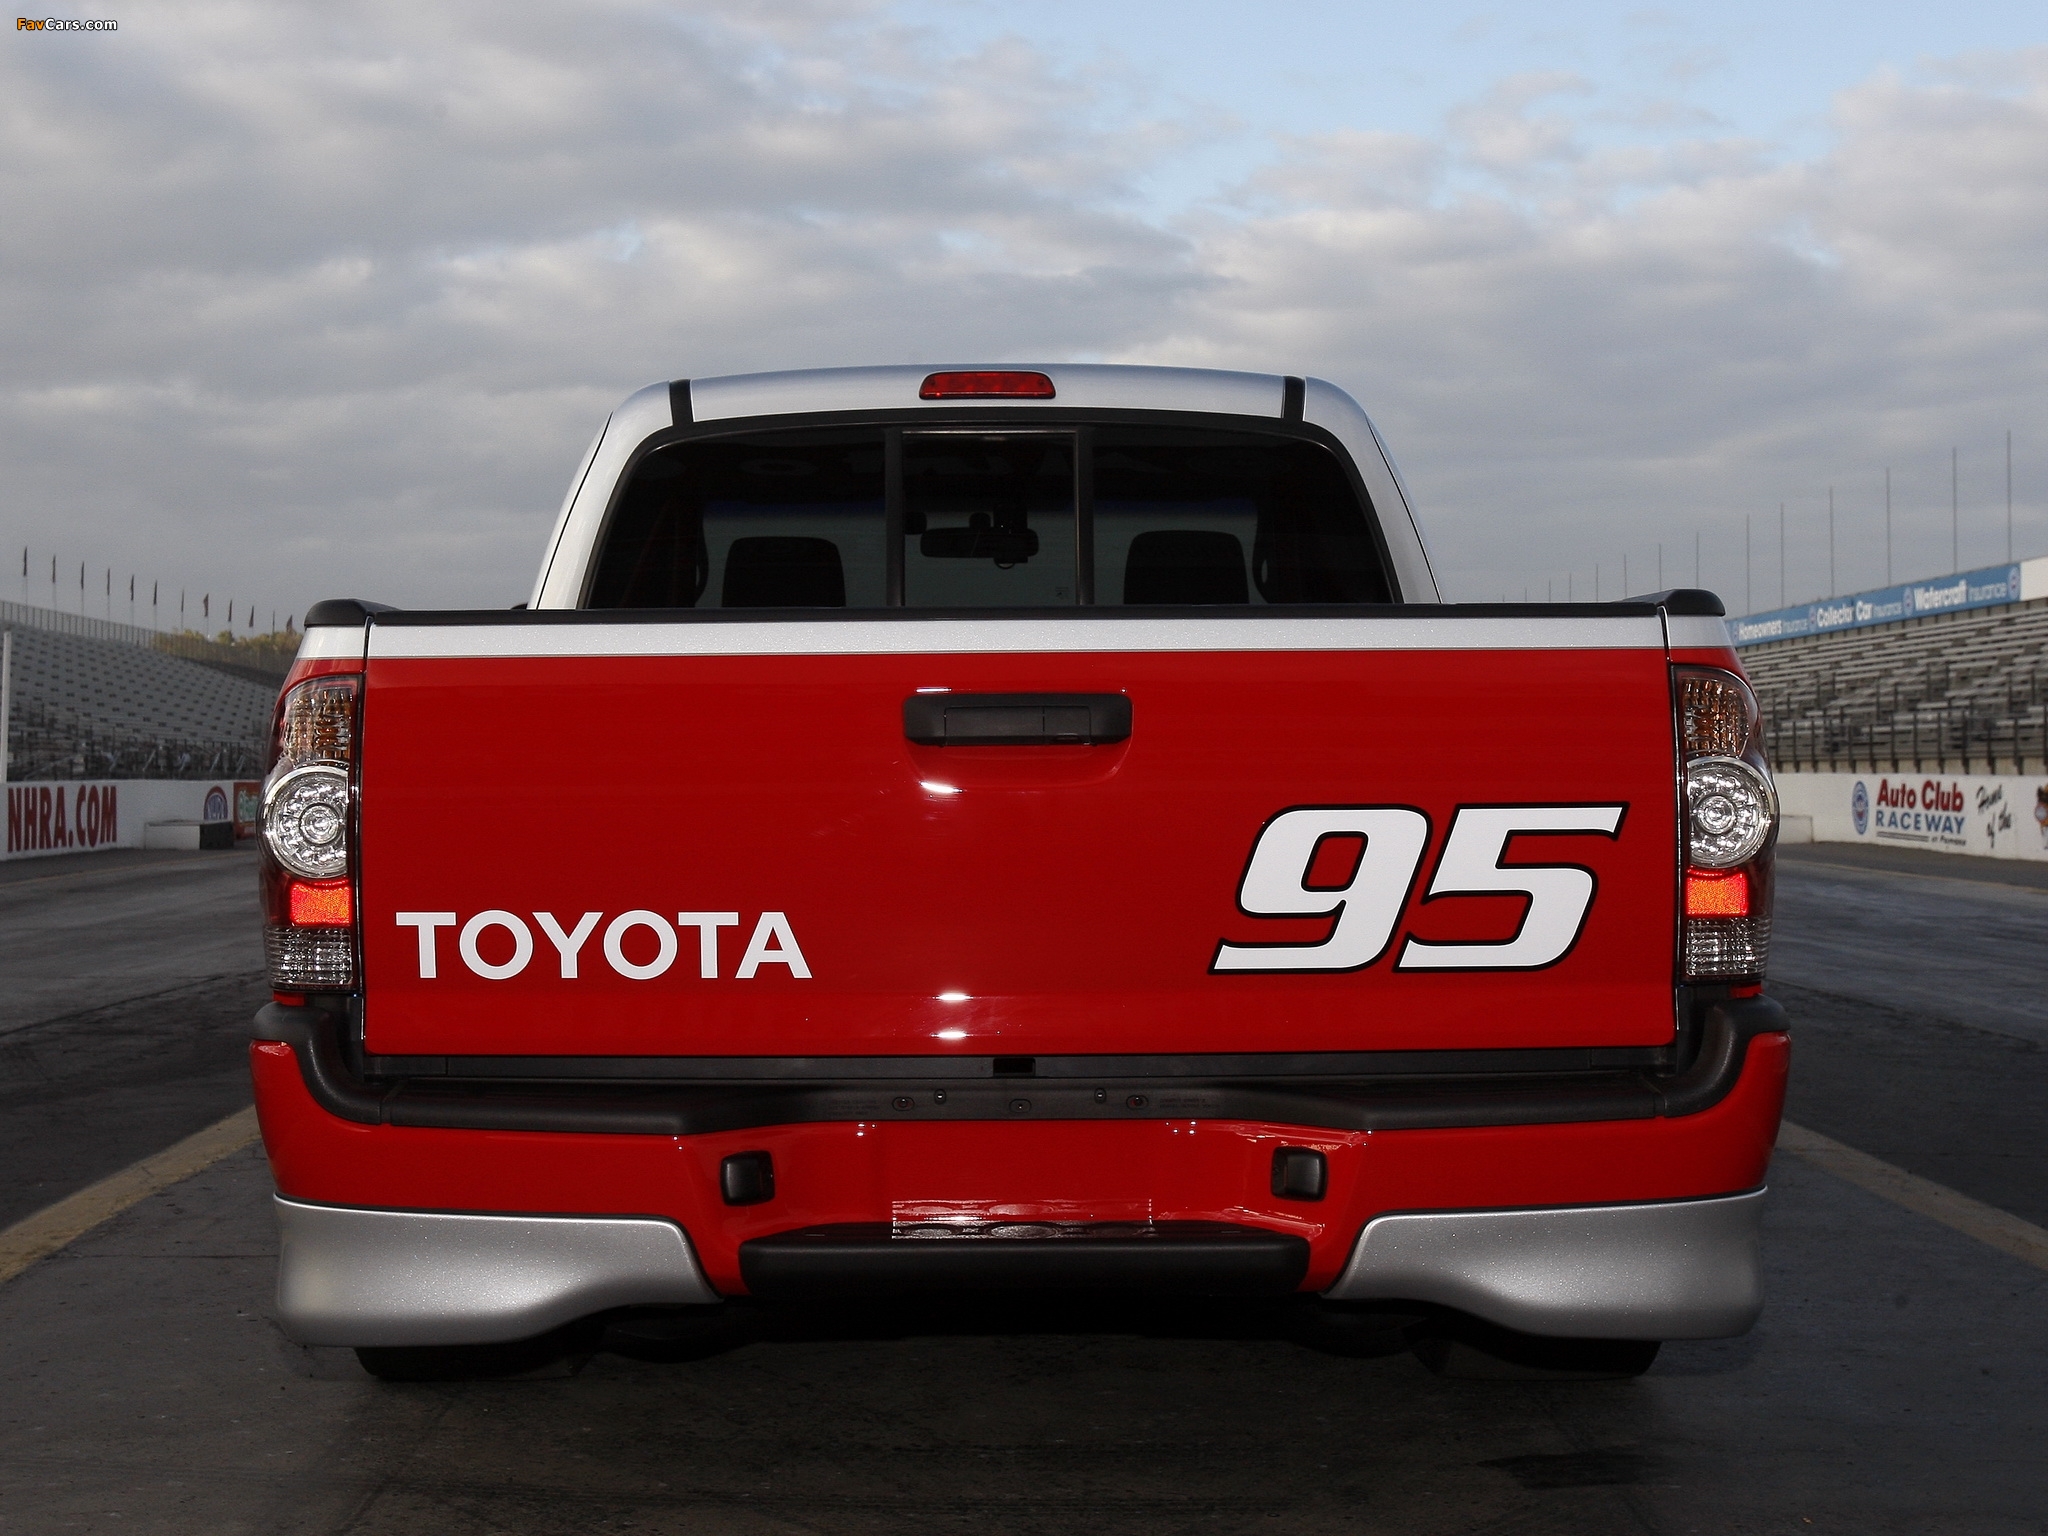 Toyota Tacoma X-Runner RTR Concept 2010 wallpapers (2048 x 1536)